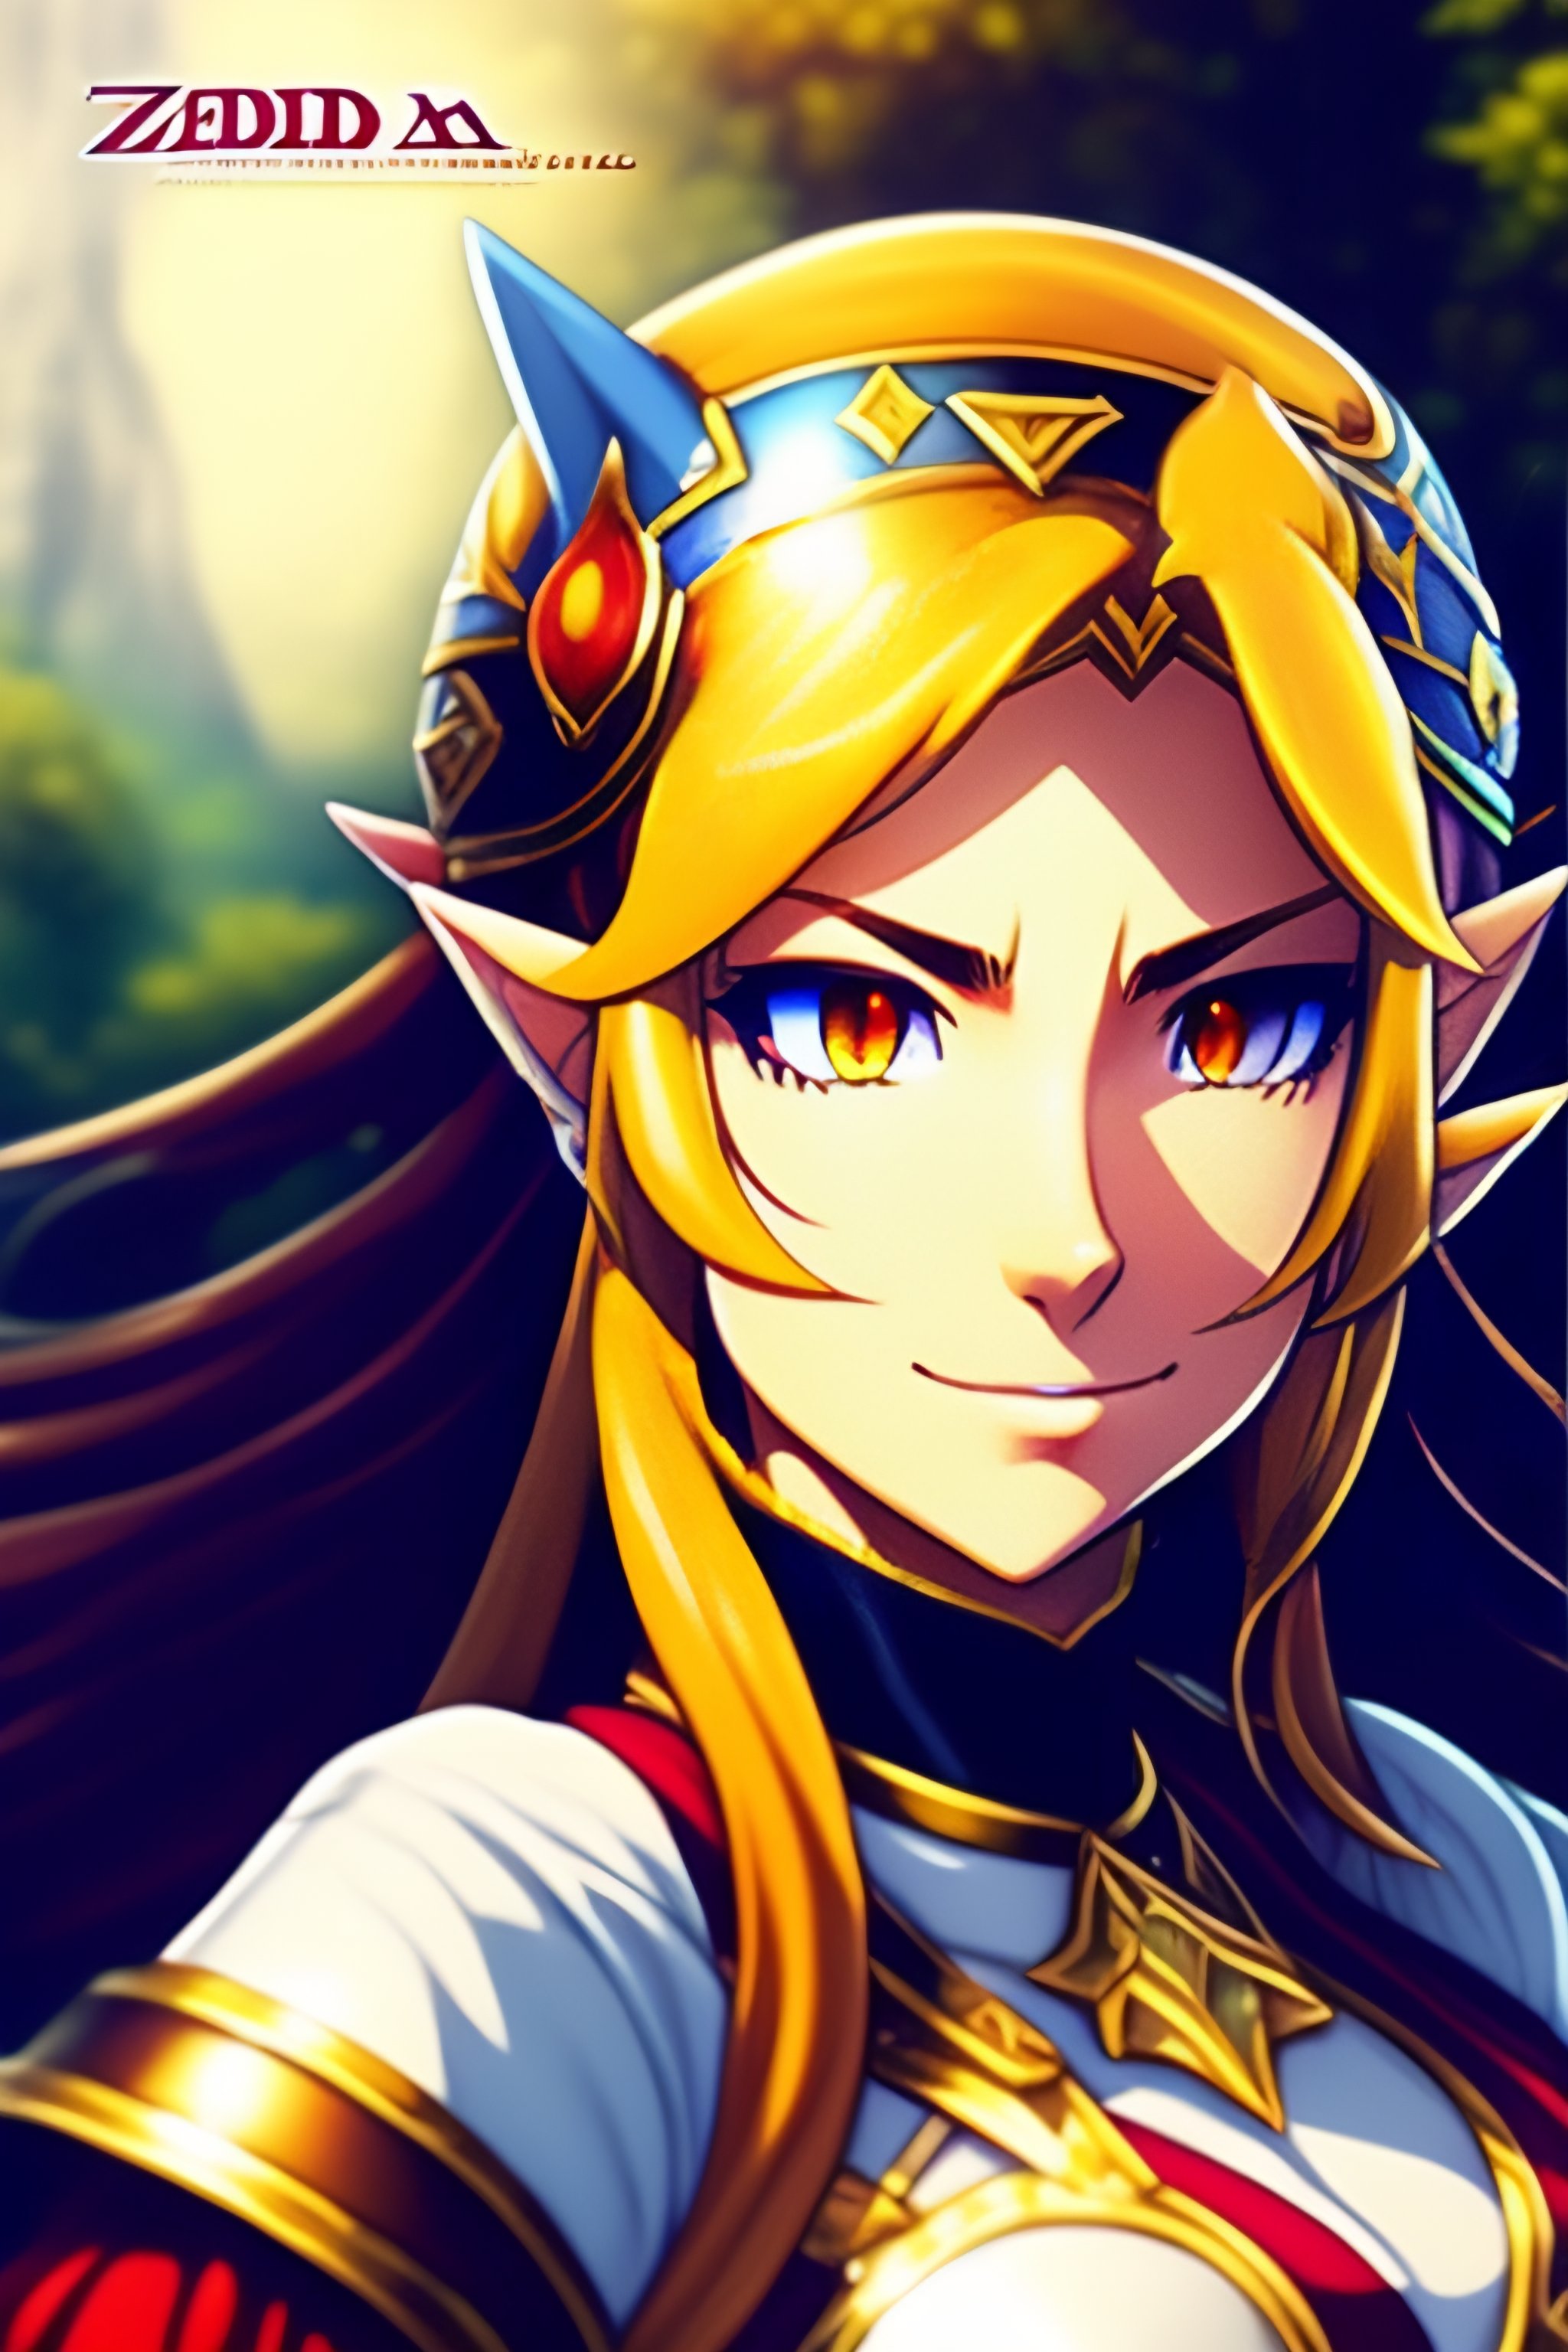 Lexica Zelda From The Legend Of Zelda Anime Style Masterpiece Art Smiling Toward The Camera 4642